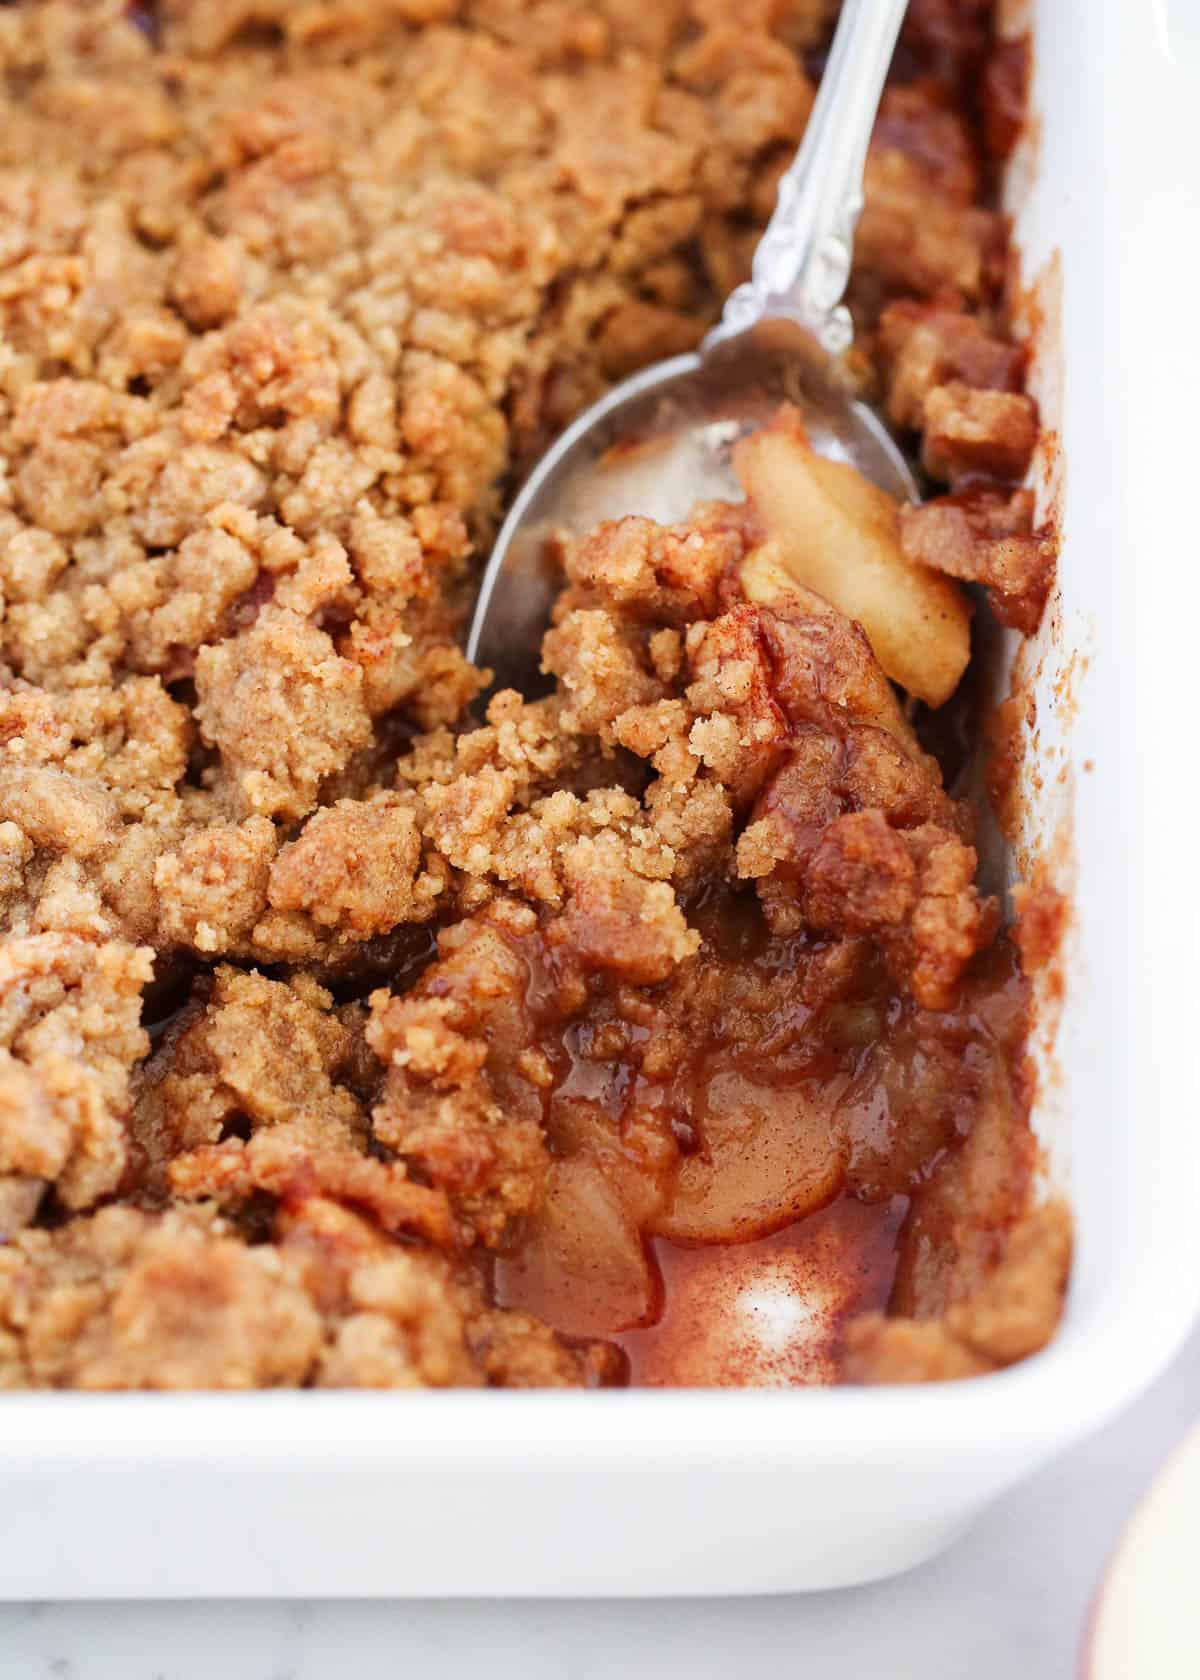 A spoon scooping out apple crumble from pan.